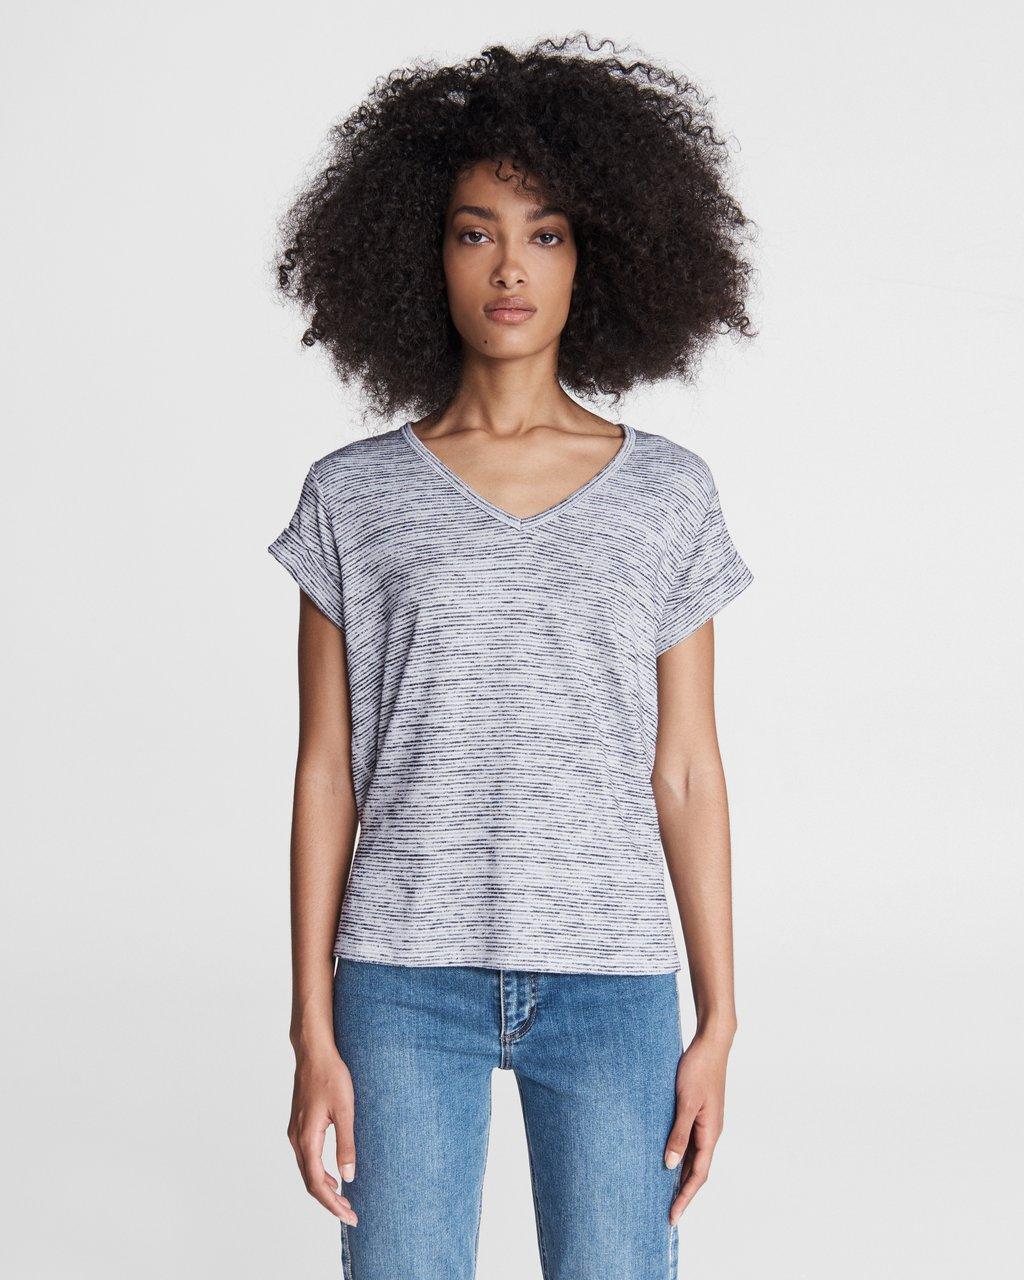 The Knit V-Neck Striped Tee